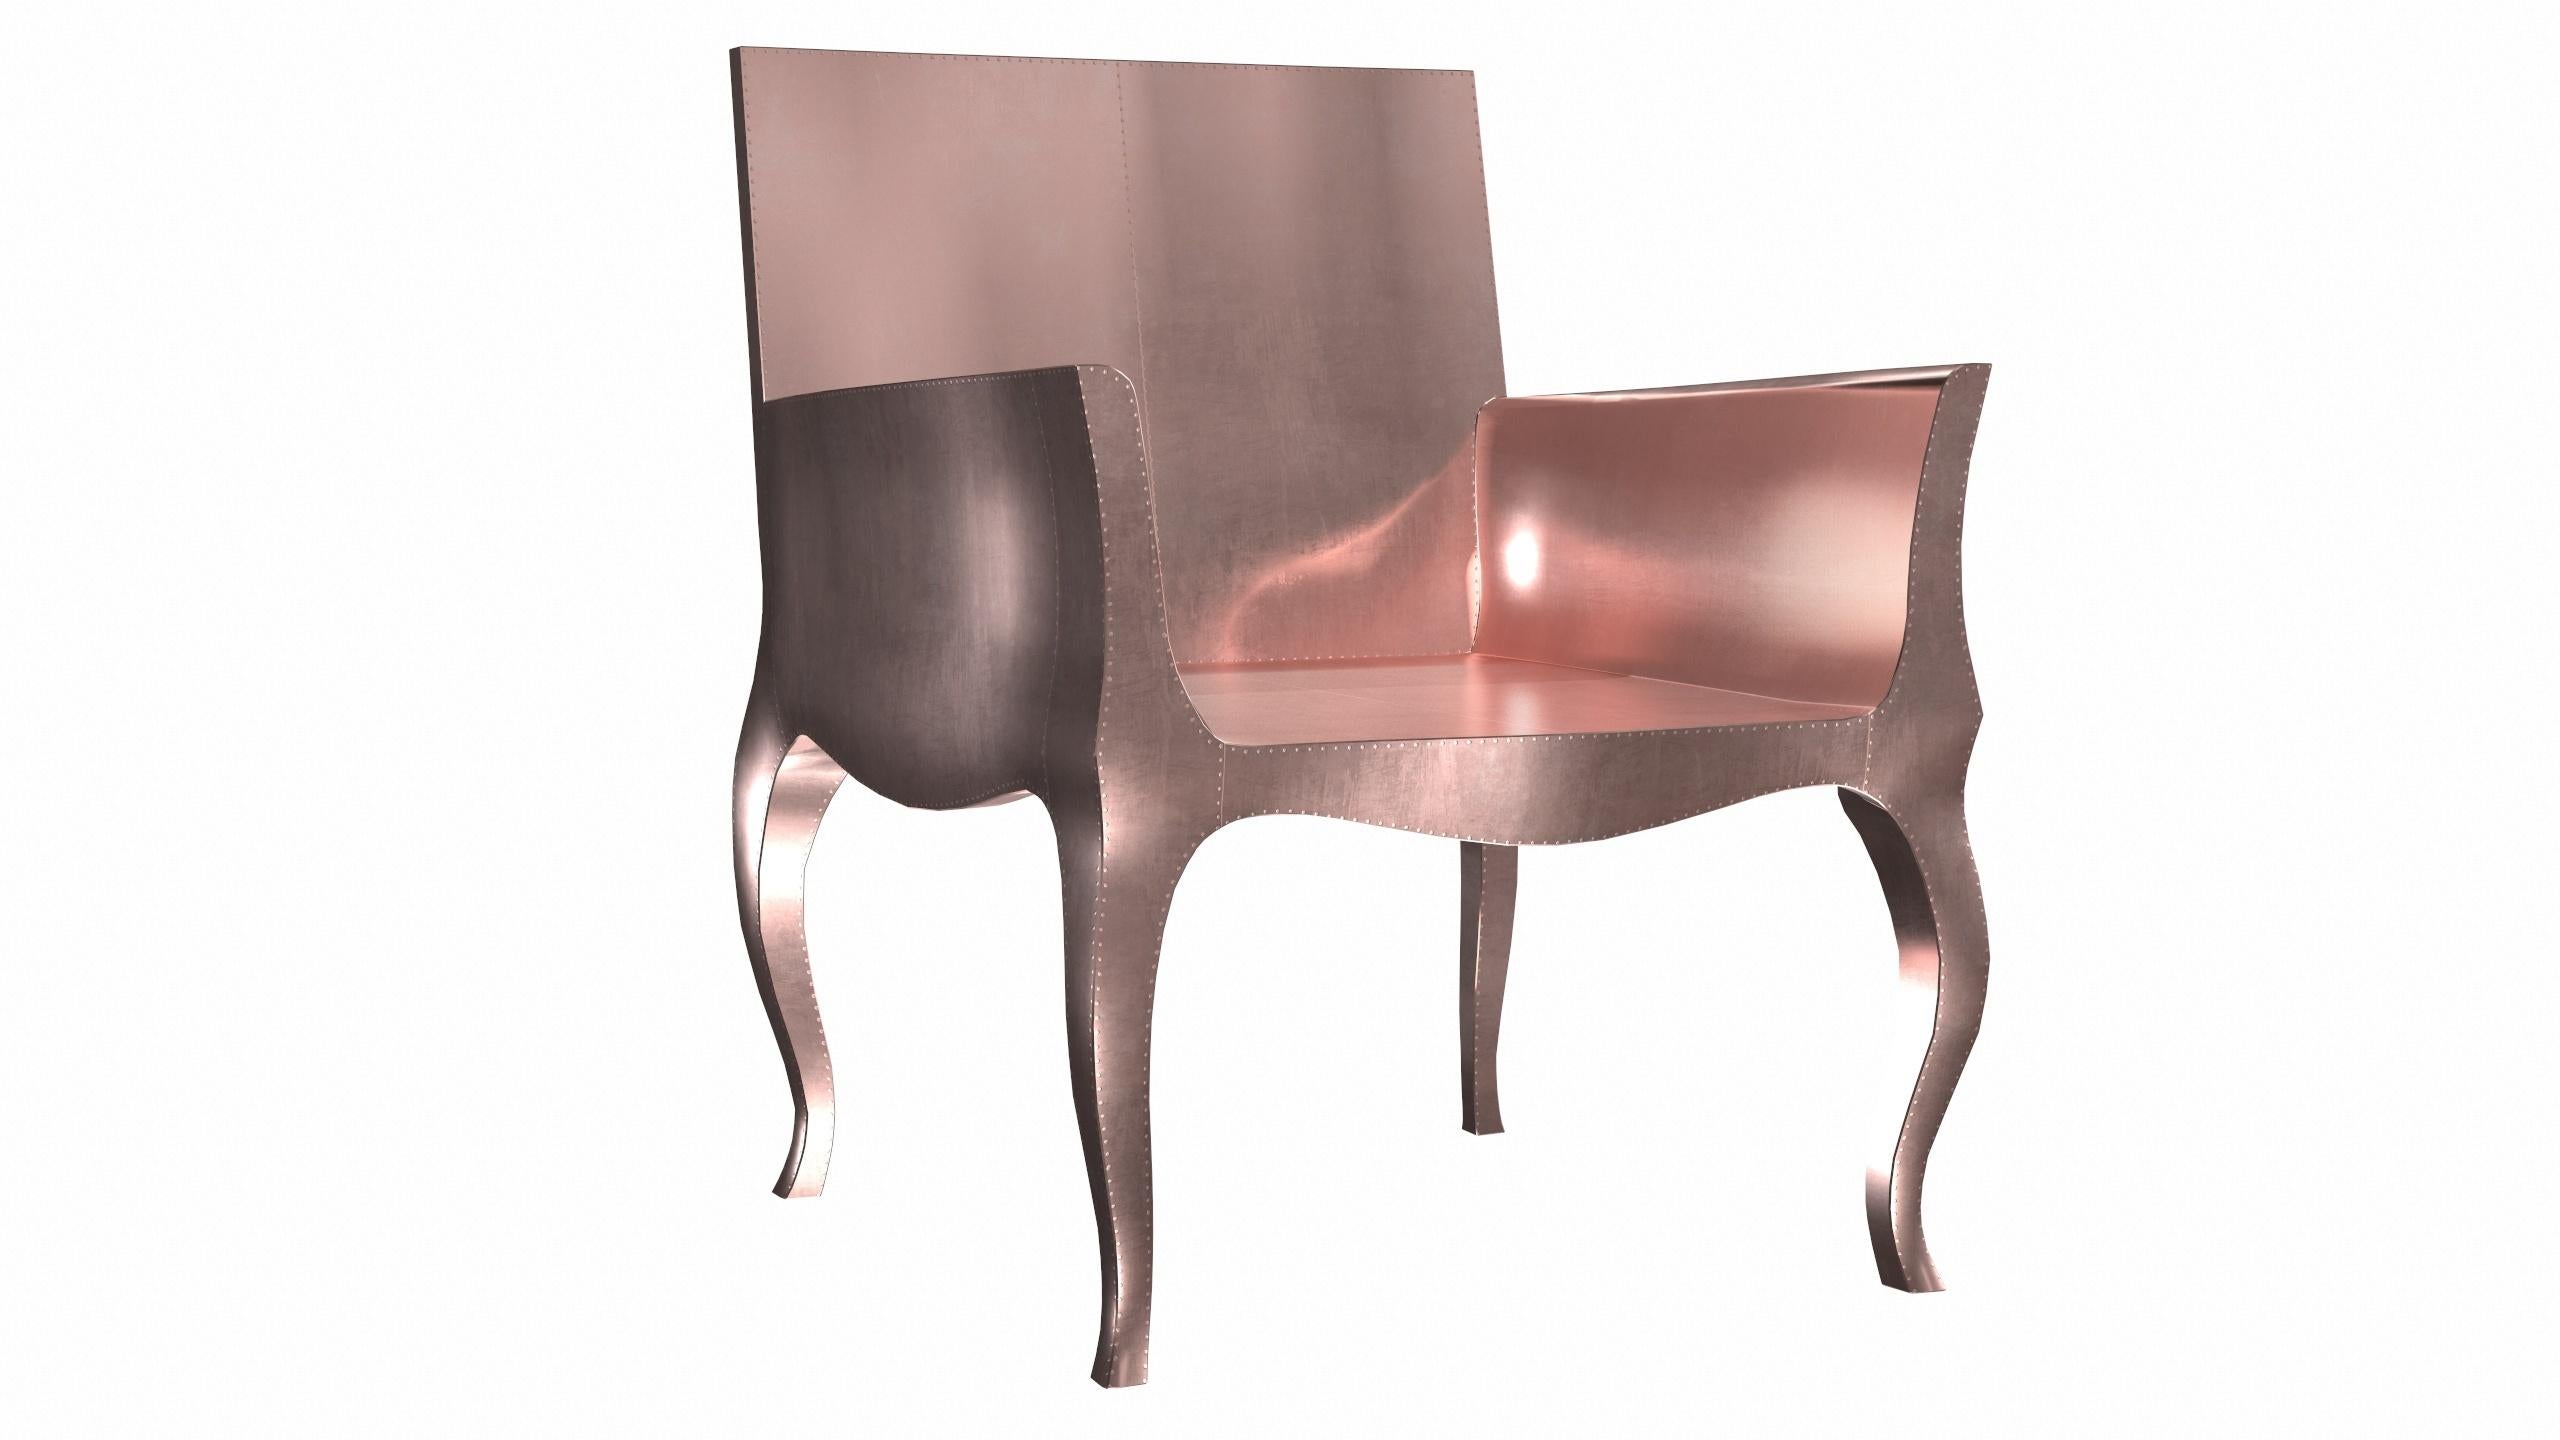 Art Deco Lounge Chair in Smooth Copper by Paul Mathieu for S. Odegard In New Condition For Sale In New York, NY